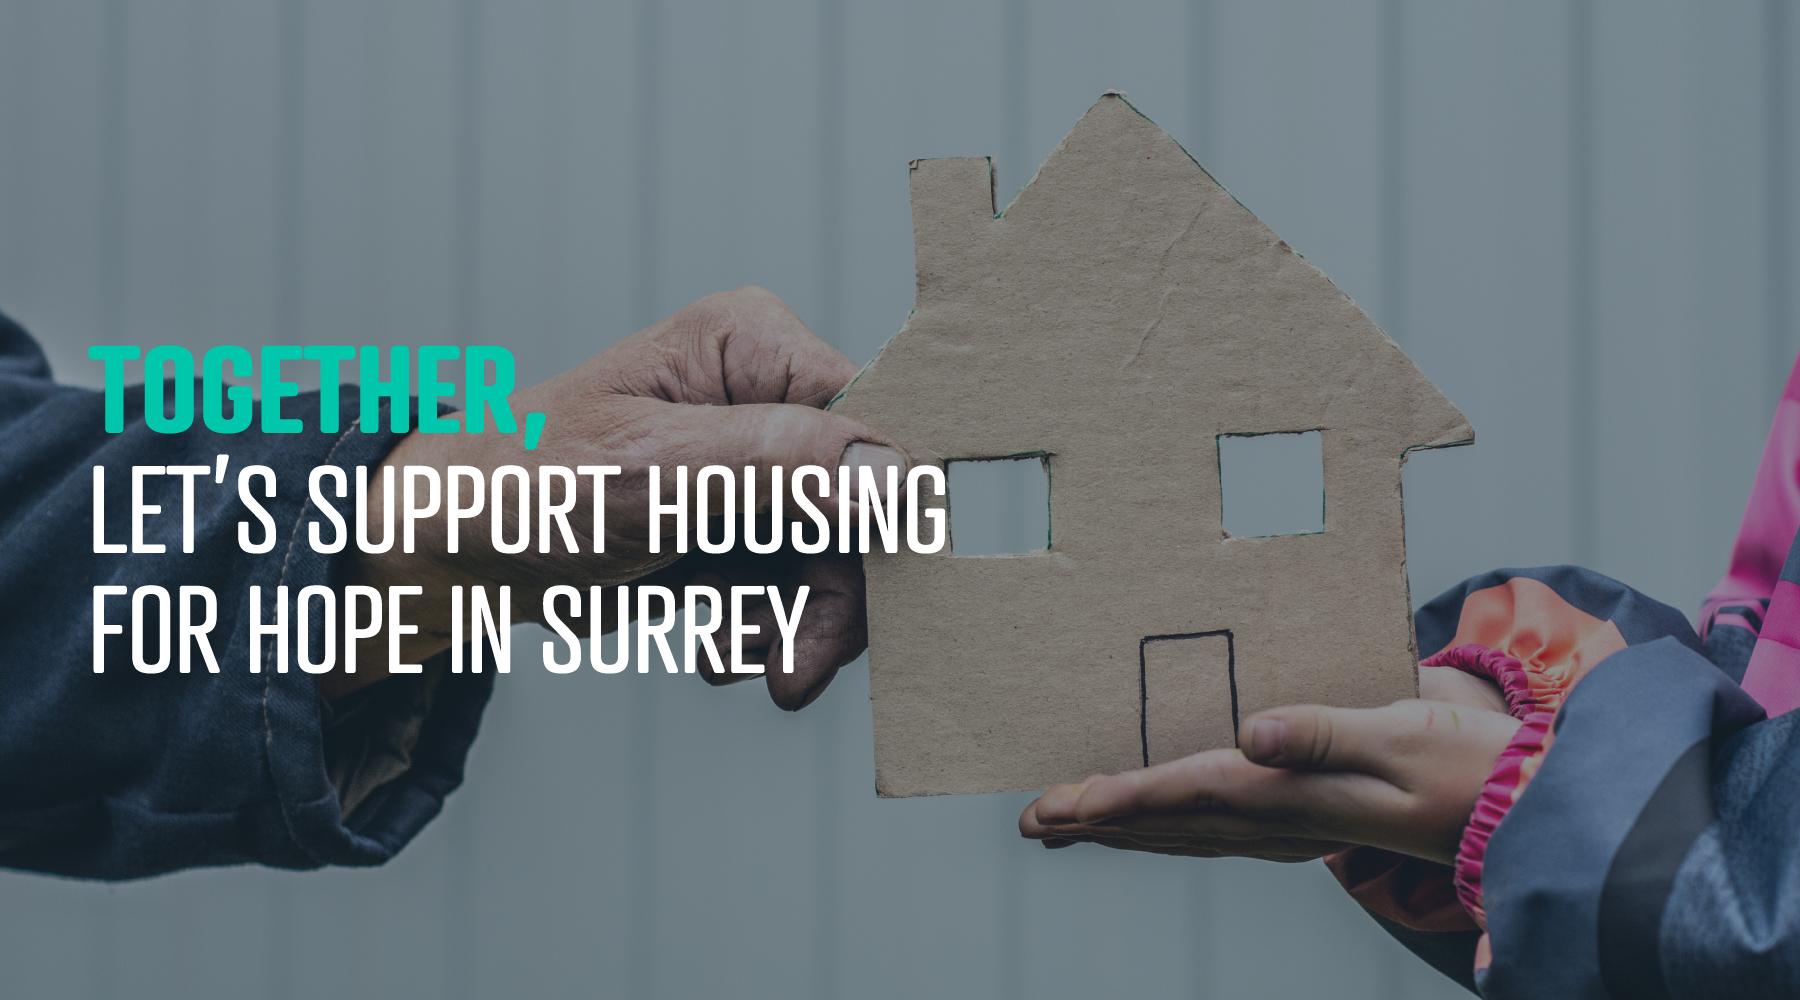 Together, let's support housing for hope in Surrey